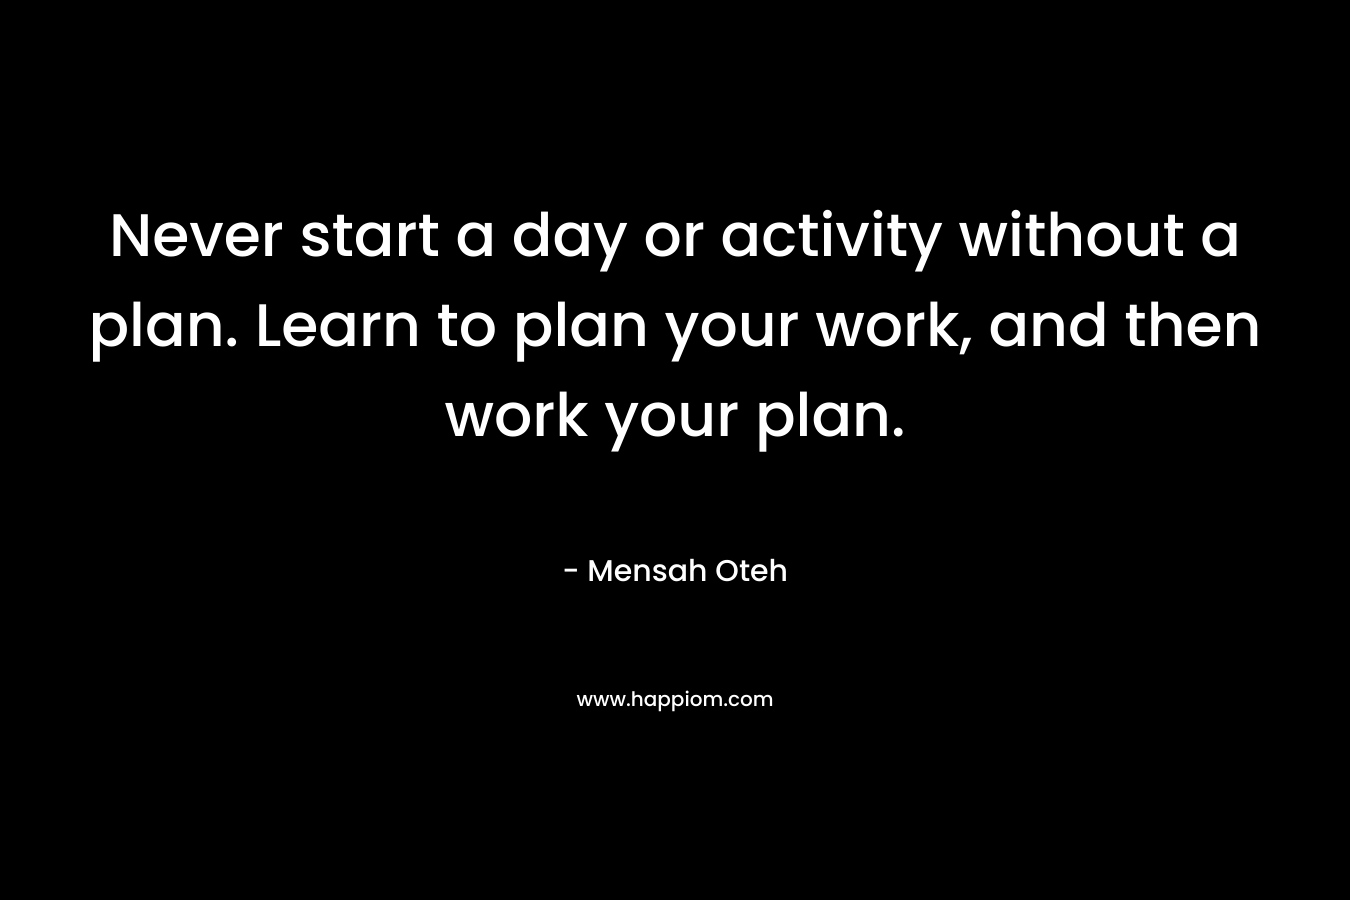 Never start a day or activity without a plan. Learn to plan your work, and then work your plan.